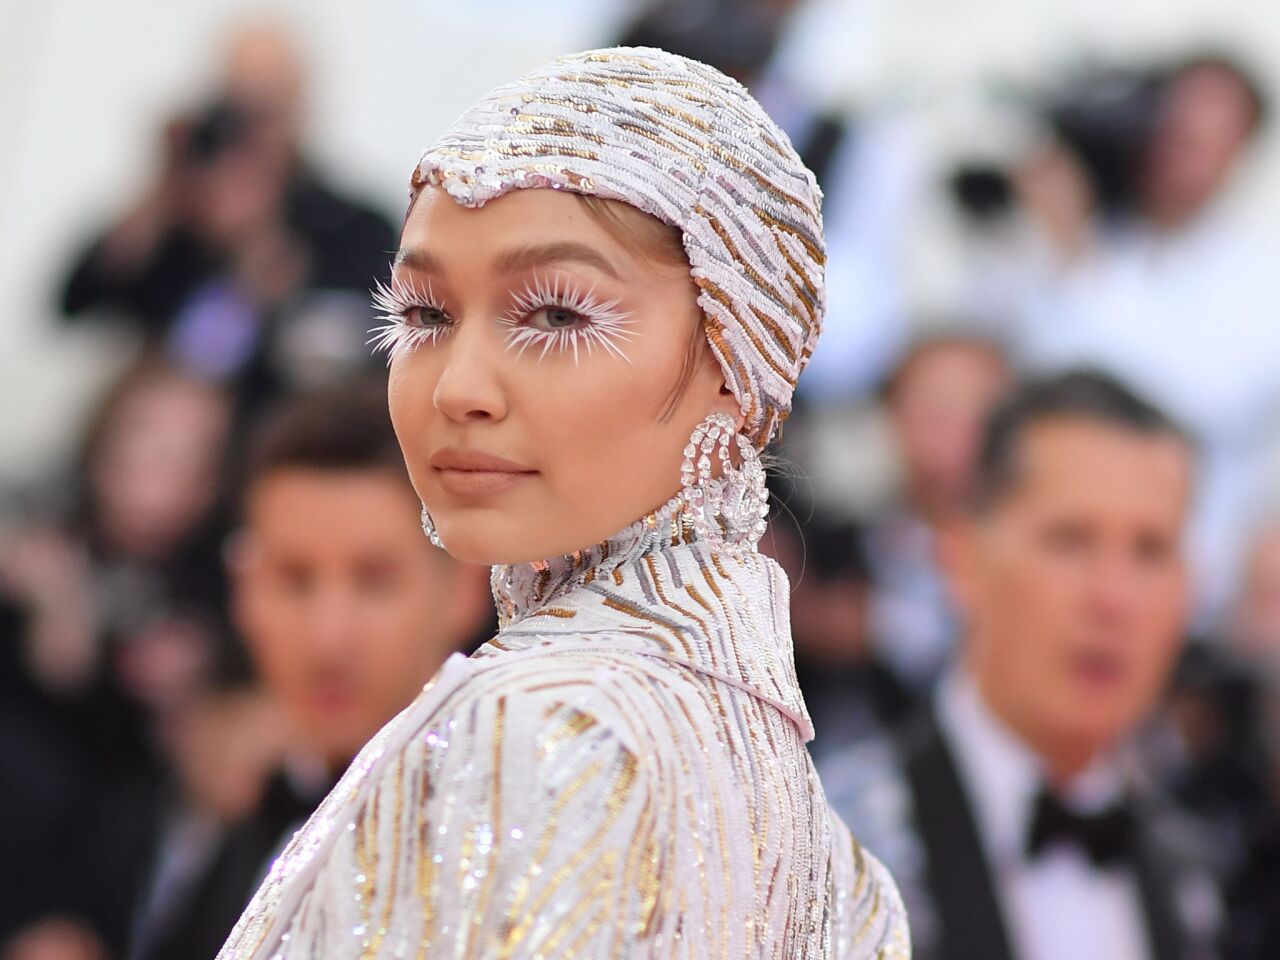 Model Gigi Hadid went heavy on the sequins and silver lashes for her Met Gala look.